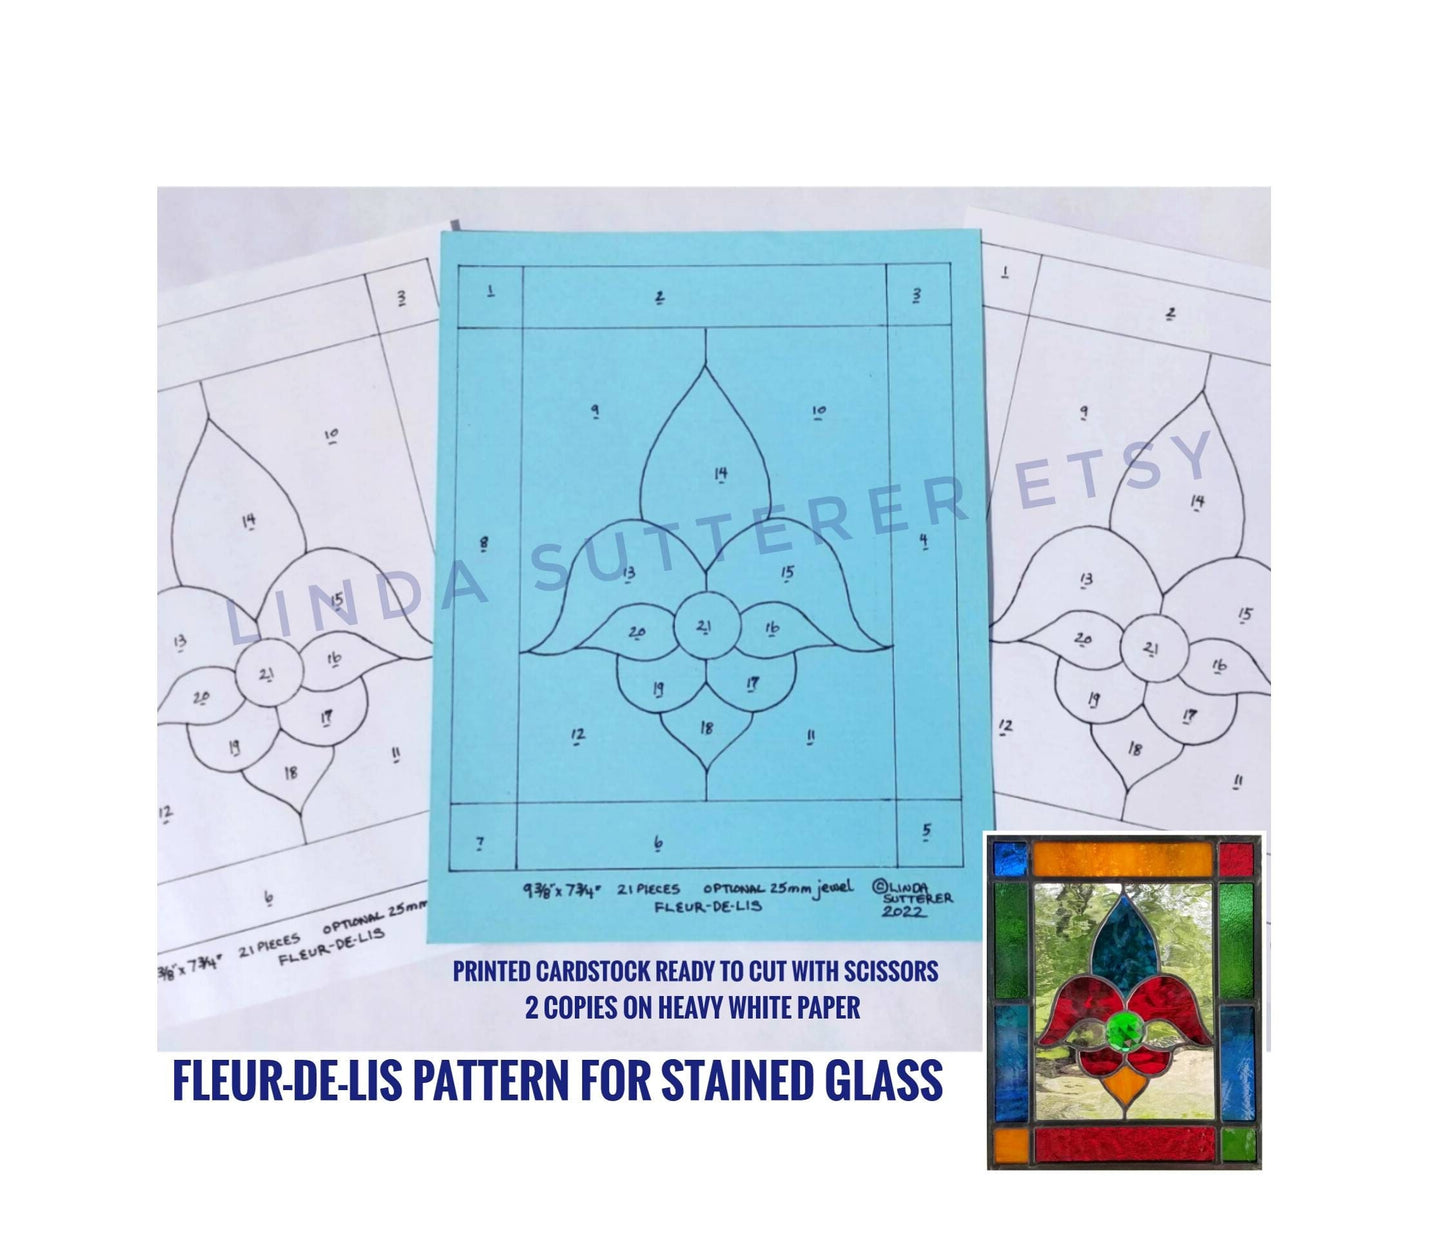 Fleur-de-Lis Pattern for Stained Glass. Printed on Cardstock, ready to cut with Scissors. Layout copy on heavy White paper to build onto.